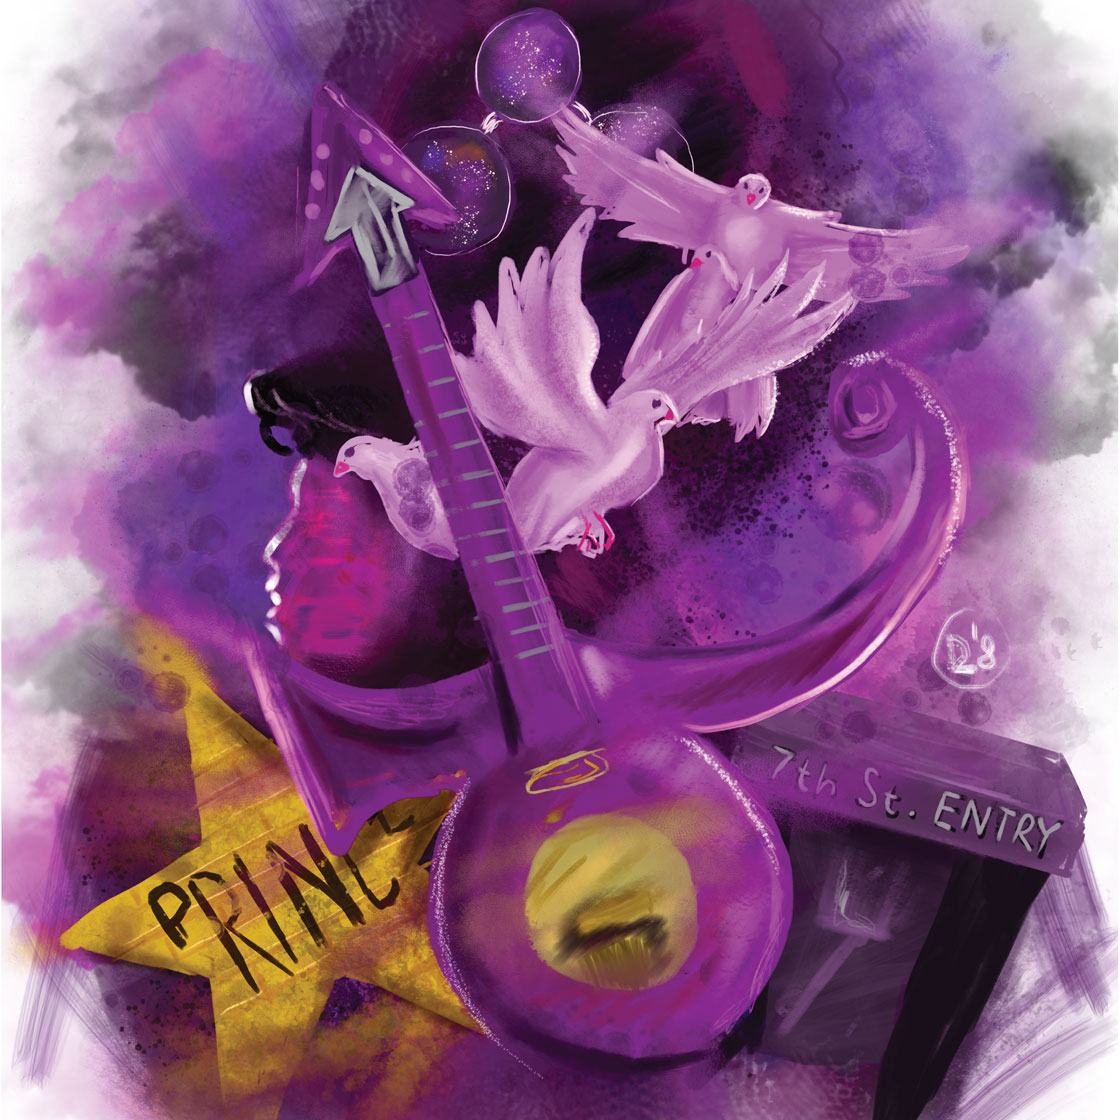 A graphically illustrated image of a purple guitar and the word Prince inside a golden star